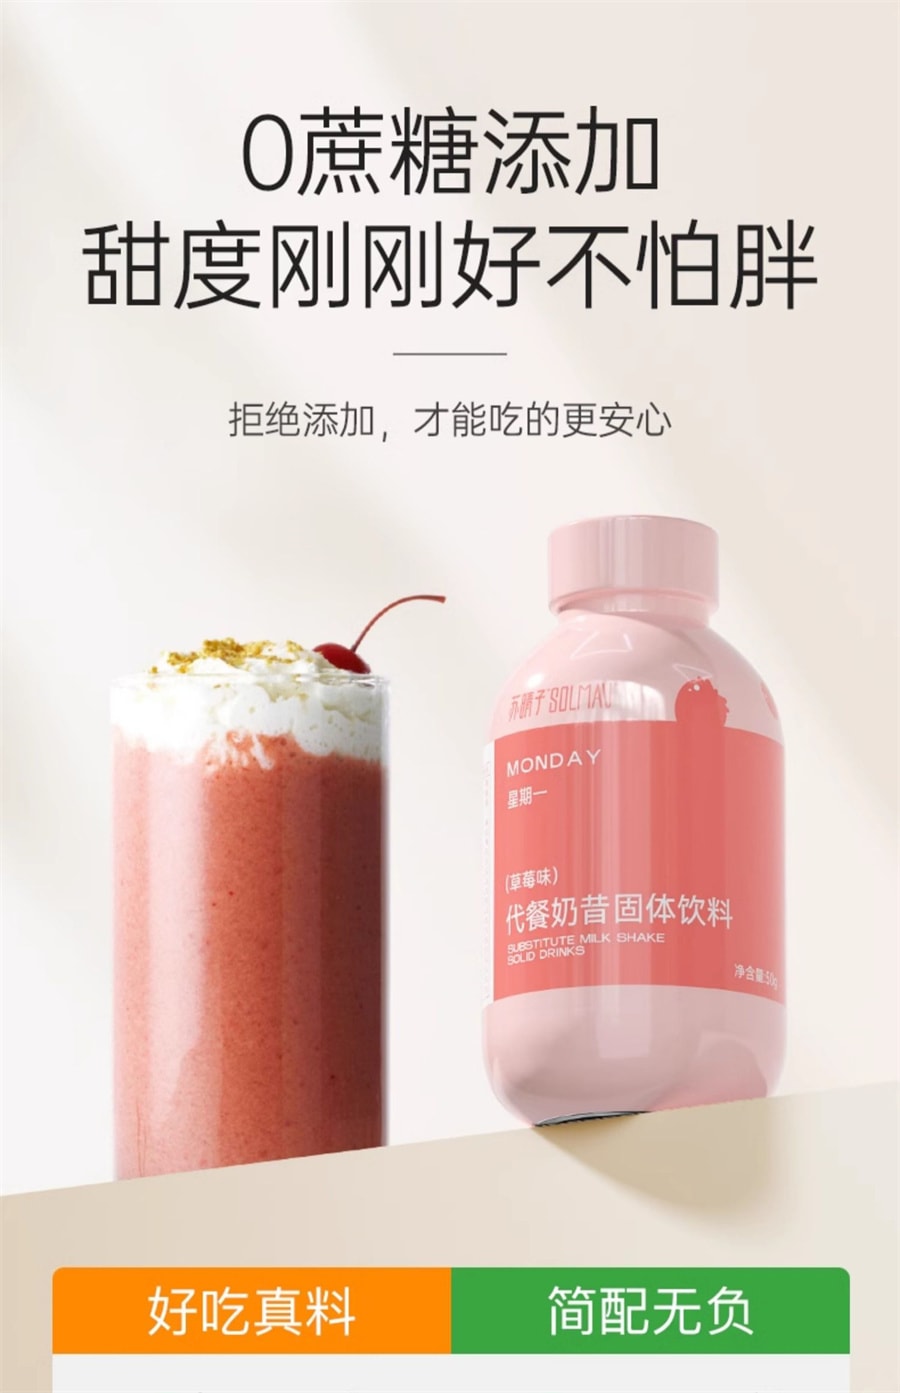 Meal Replacement Shake Nutritional Satiety Food Staple Breakfast Dinner Meal Replacement Powder Drink Milk Tea 10